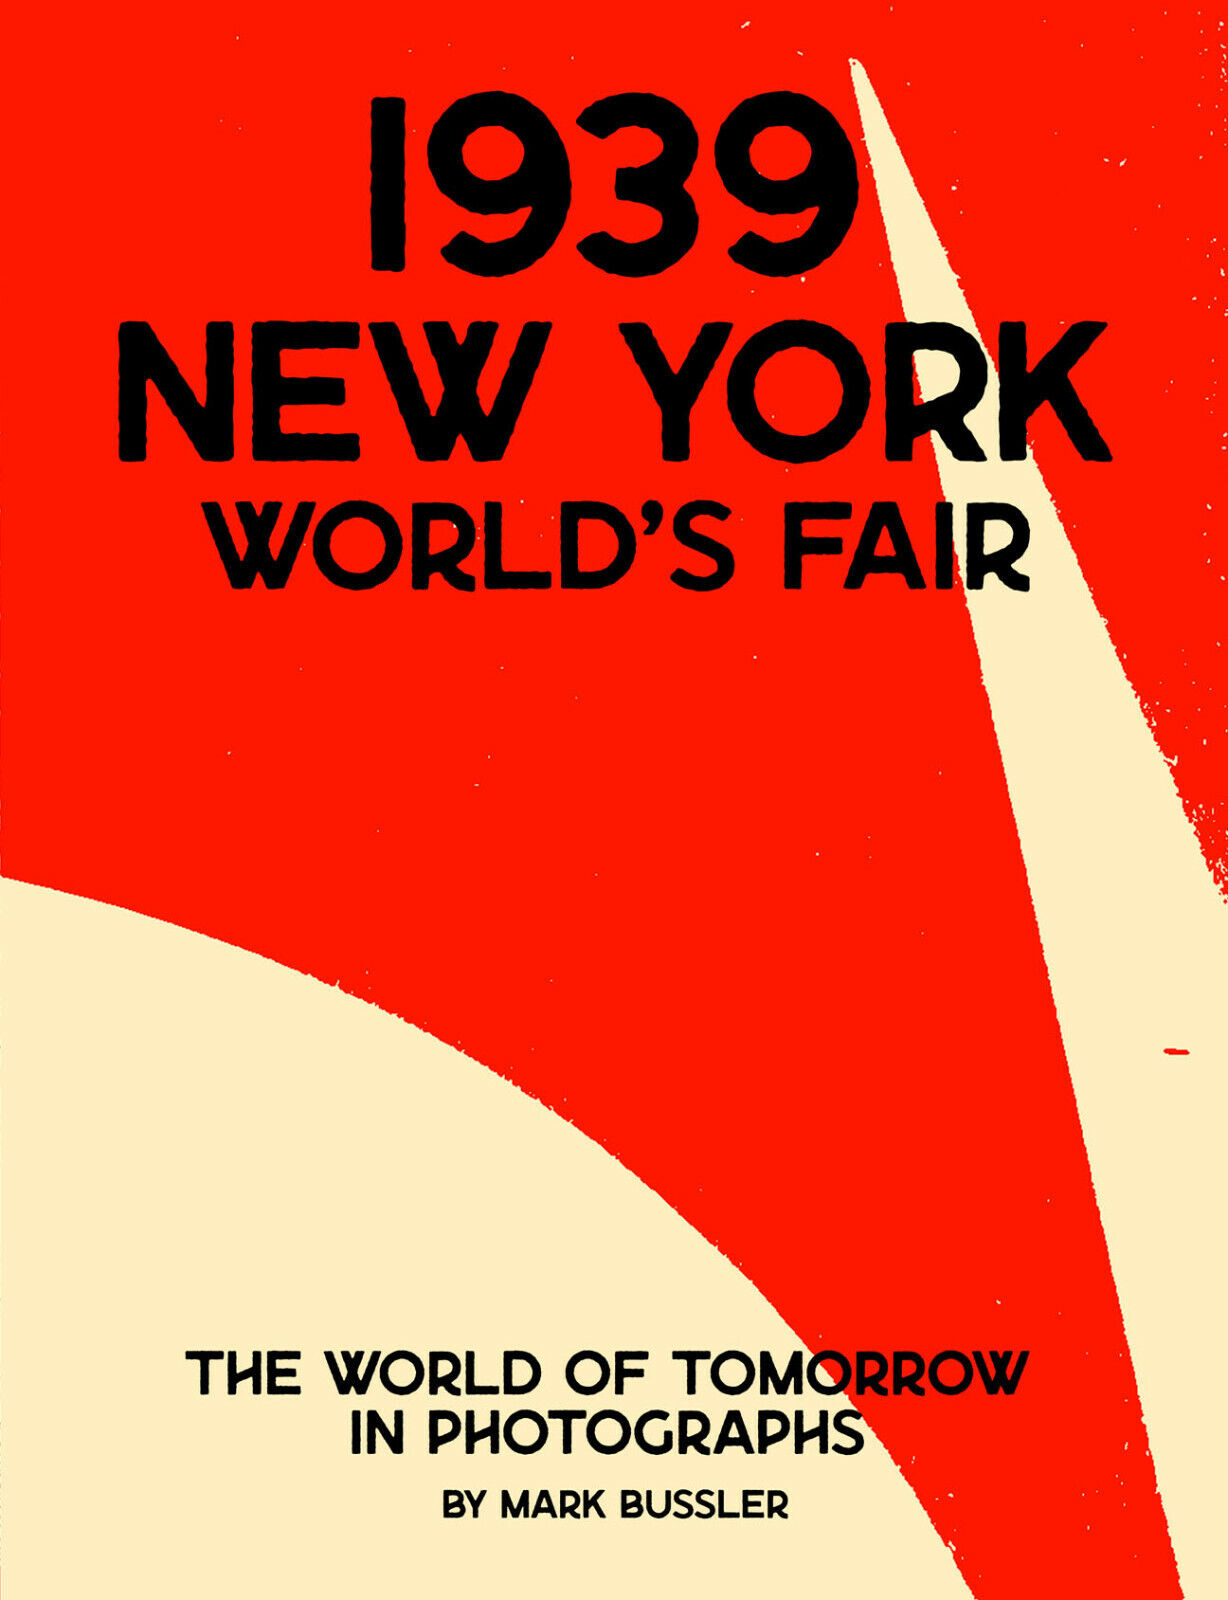 1939 New York World's Fair: The World of Tomorrow in Photographs book *NEW*